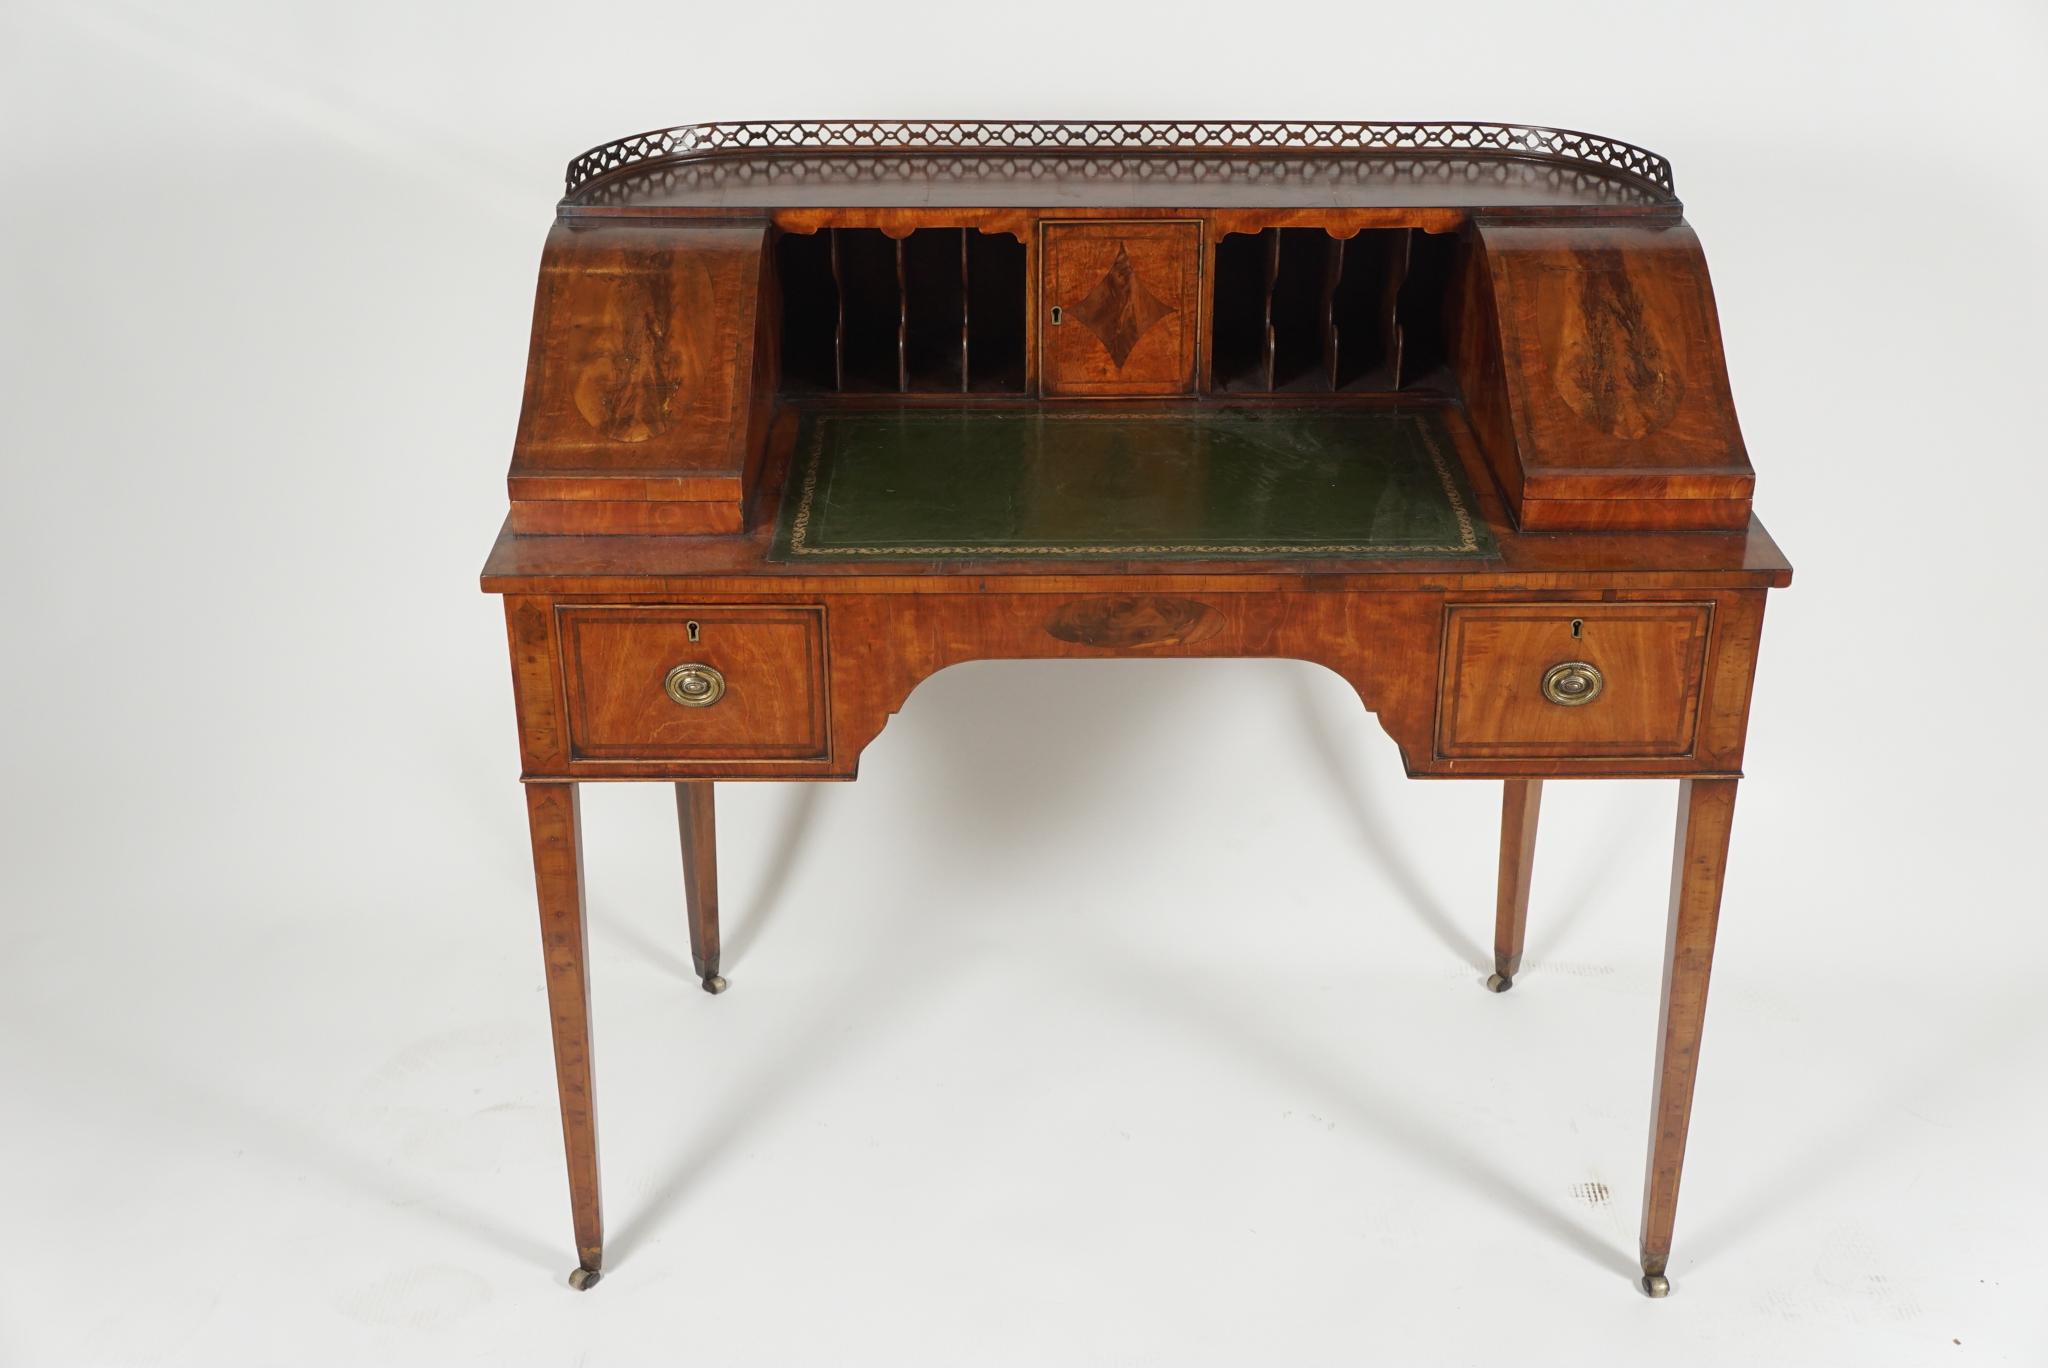 Beautiful small desk from Edwardian period, English, in satinwood with tooled leather writing surface and brass fitments and tapered legs. 
The upper portion has slots for envelopes and two small boxes for storing stationery, etc. Design based on